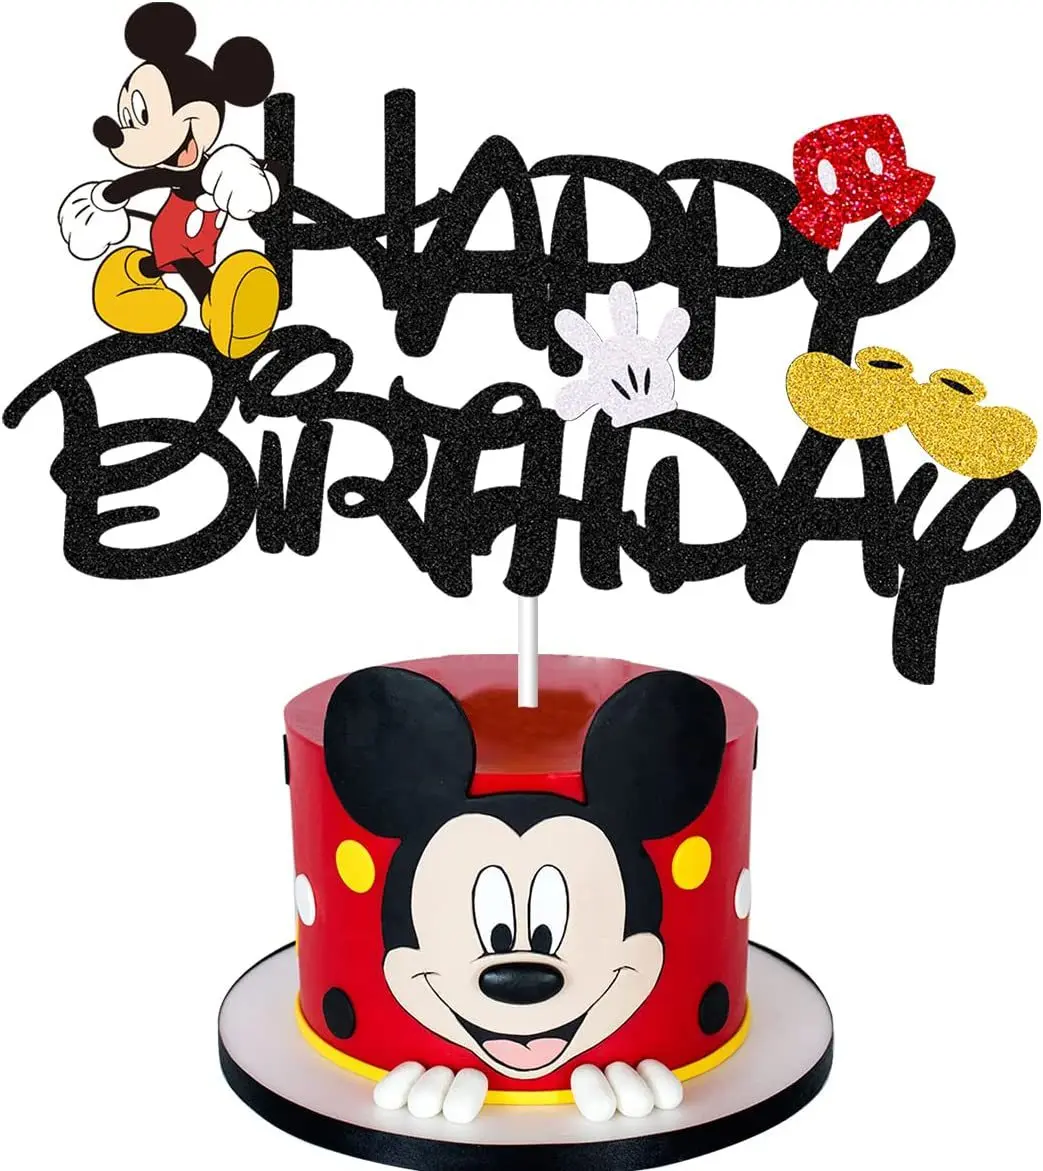 Disney Mickey Minnie Mouse Cake Decoration Twodles Party Cake Topper For Kids Birthday Party Baby Shower Cake Flag Supplies Gift images - 6